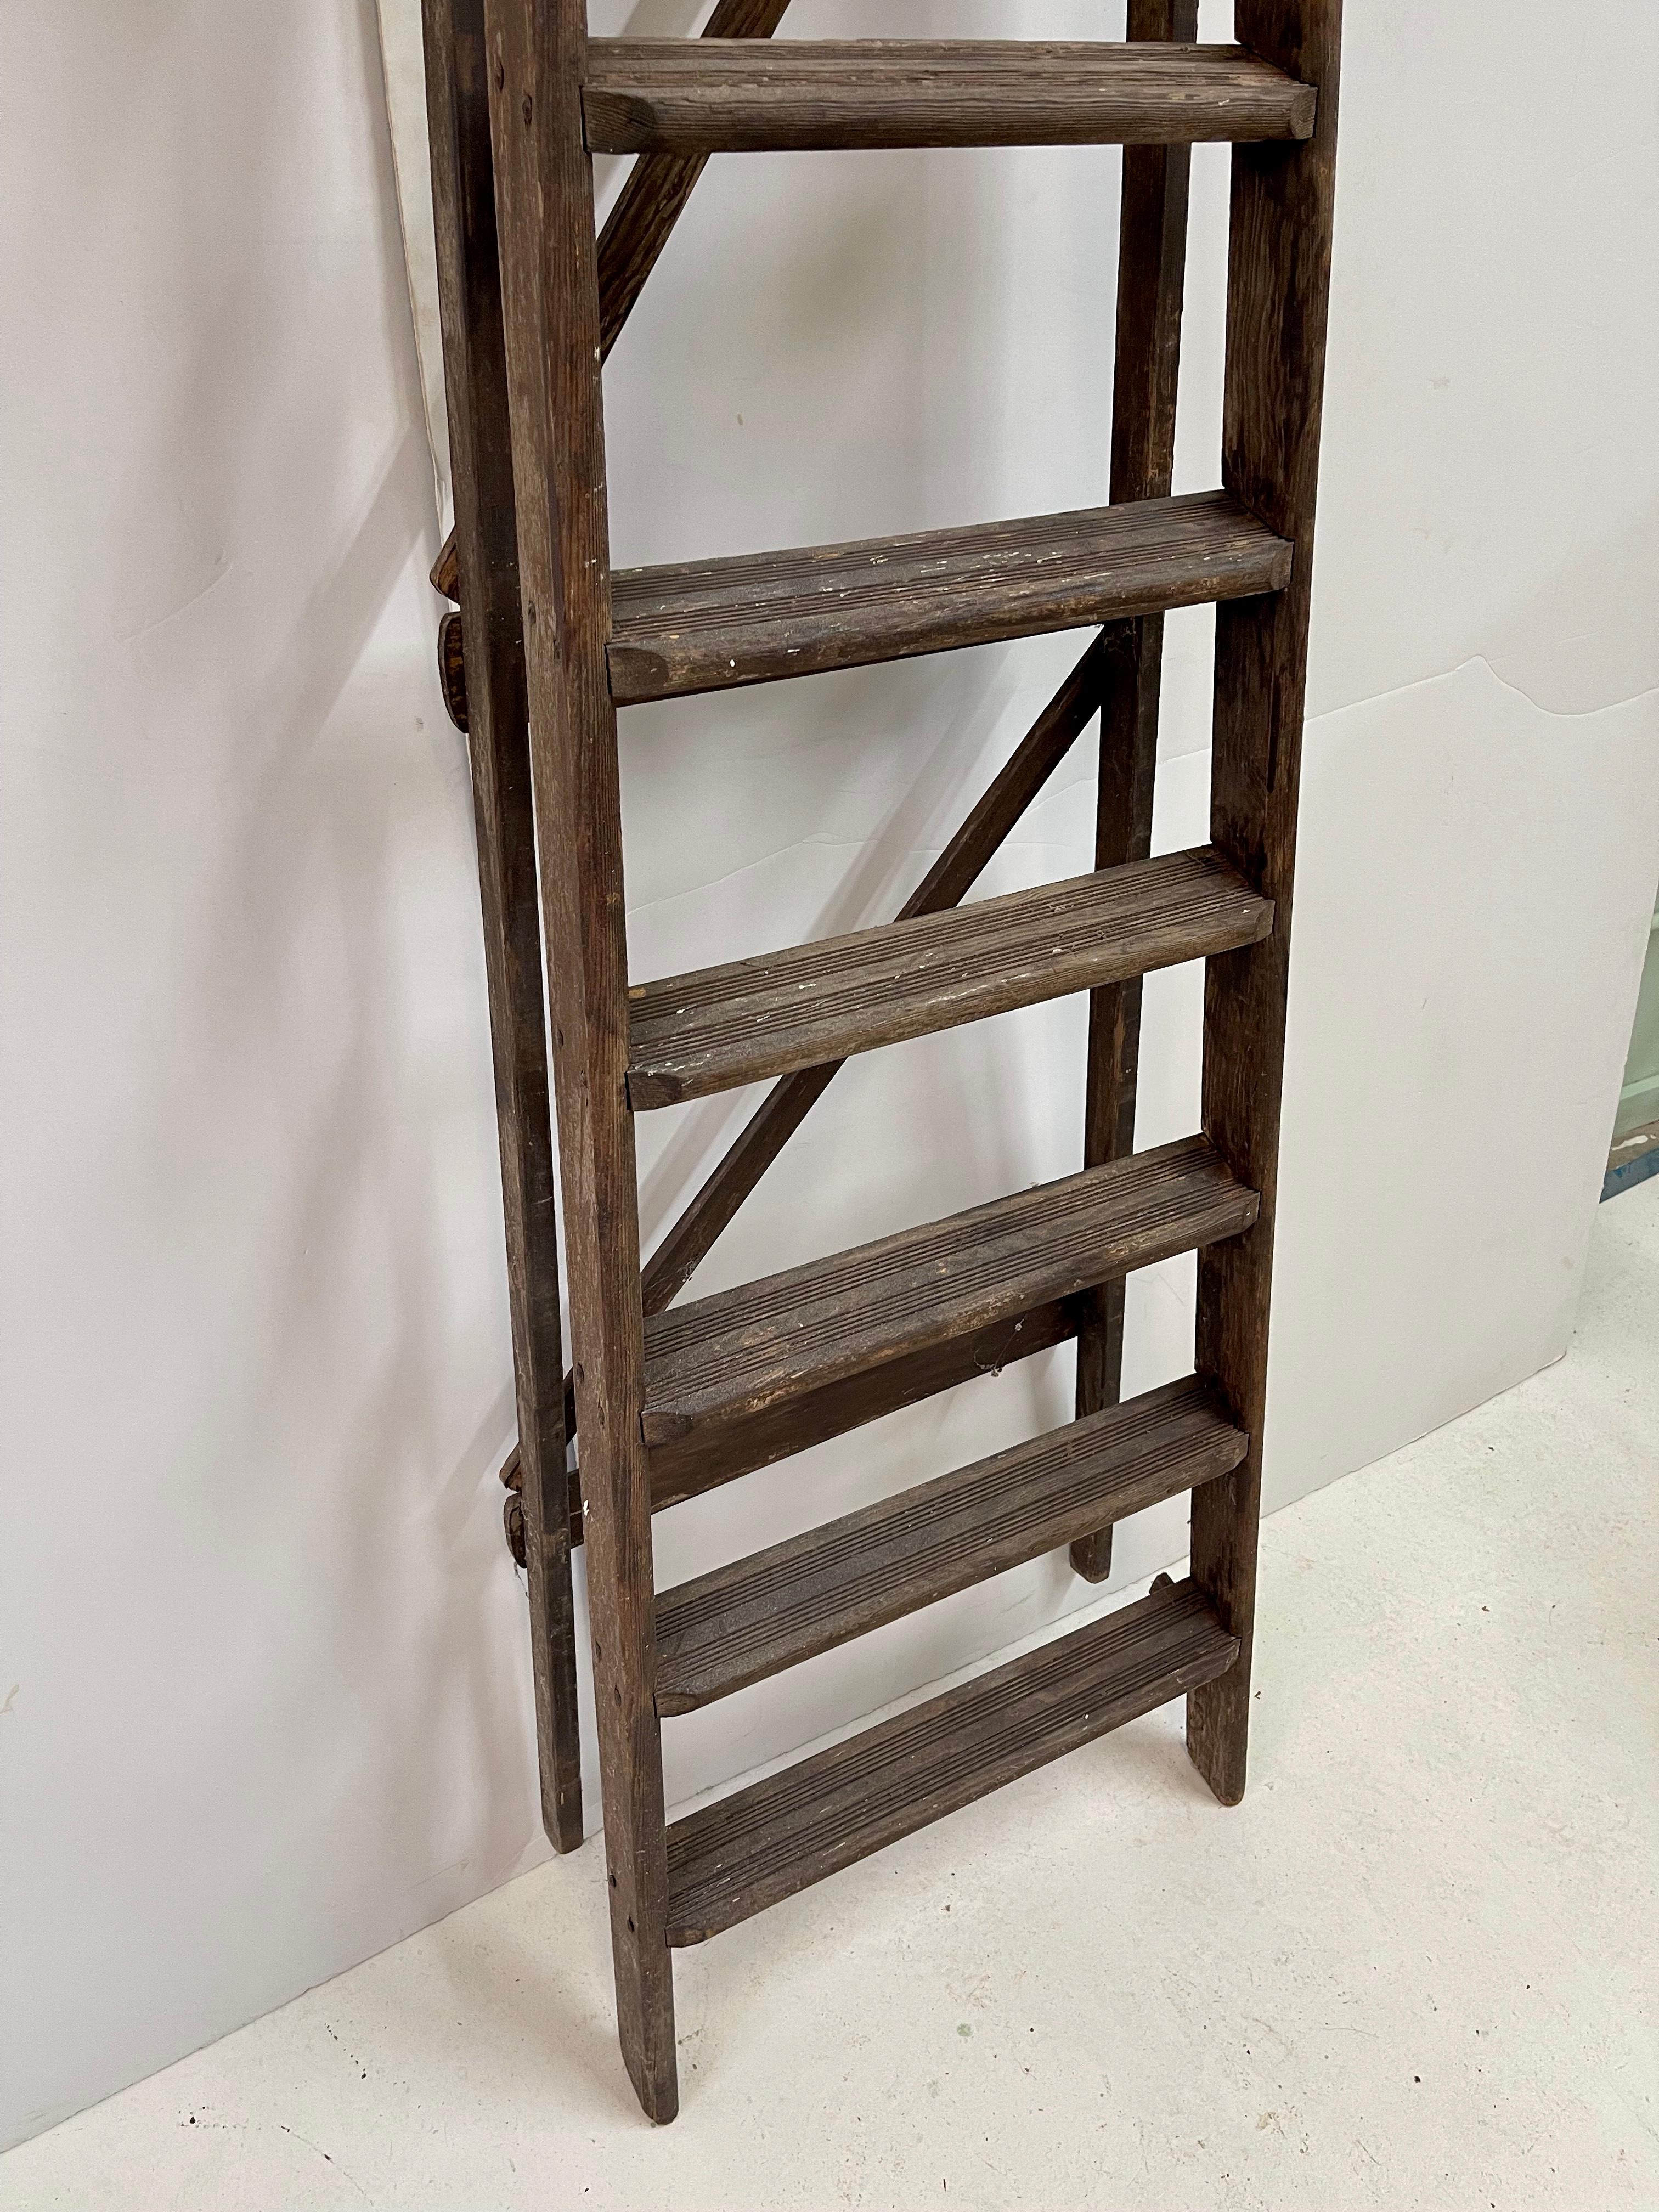 English Antique Wooden Folding Ladder with Tray Shelf For Sale 1